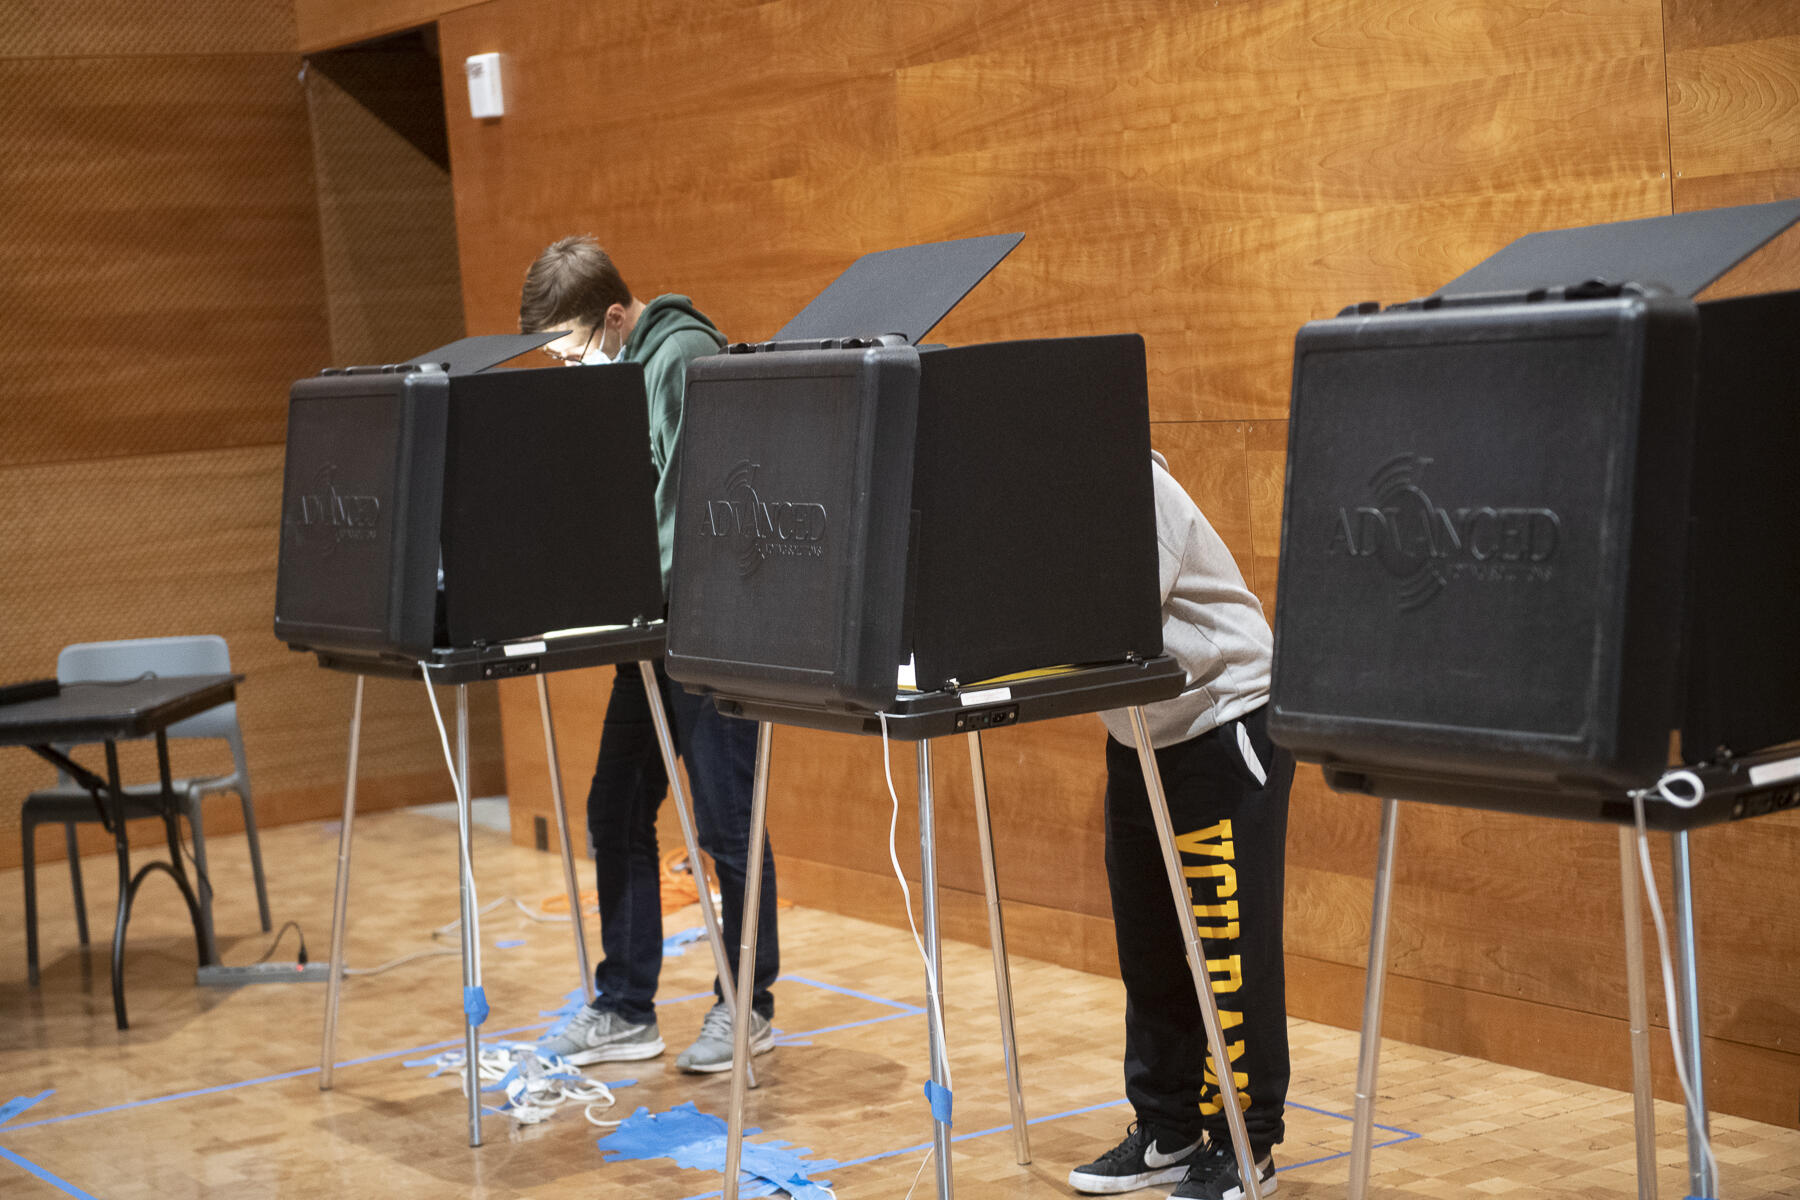 Voting on Election Day 2021 at Virginia Commonwealth University